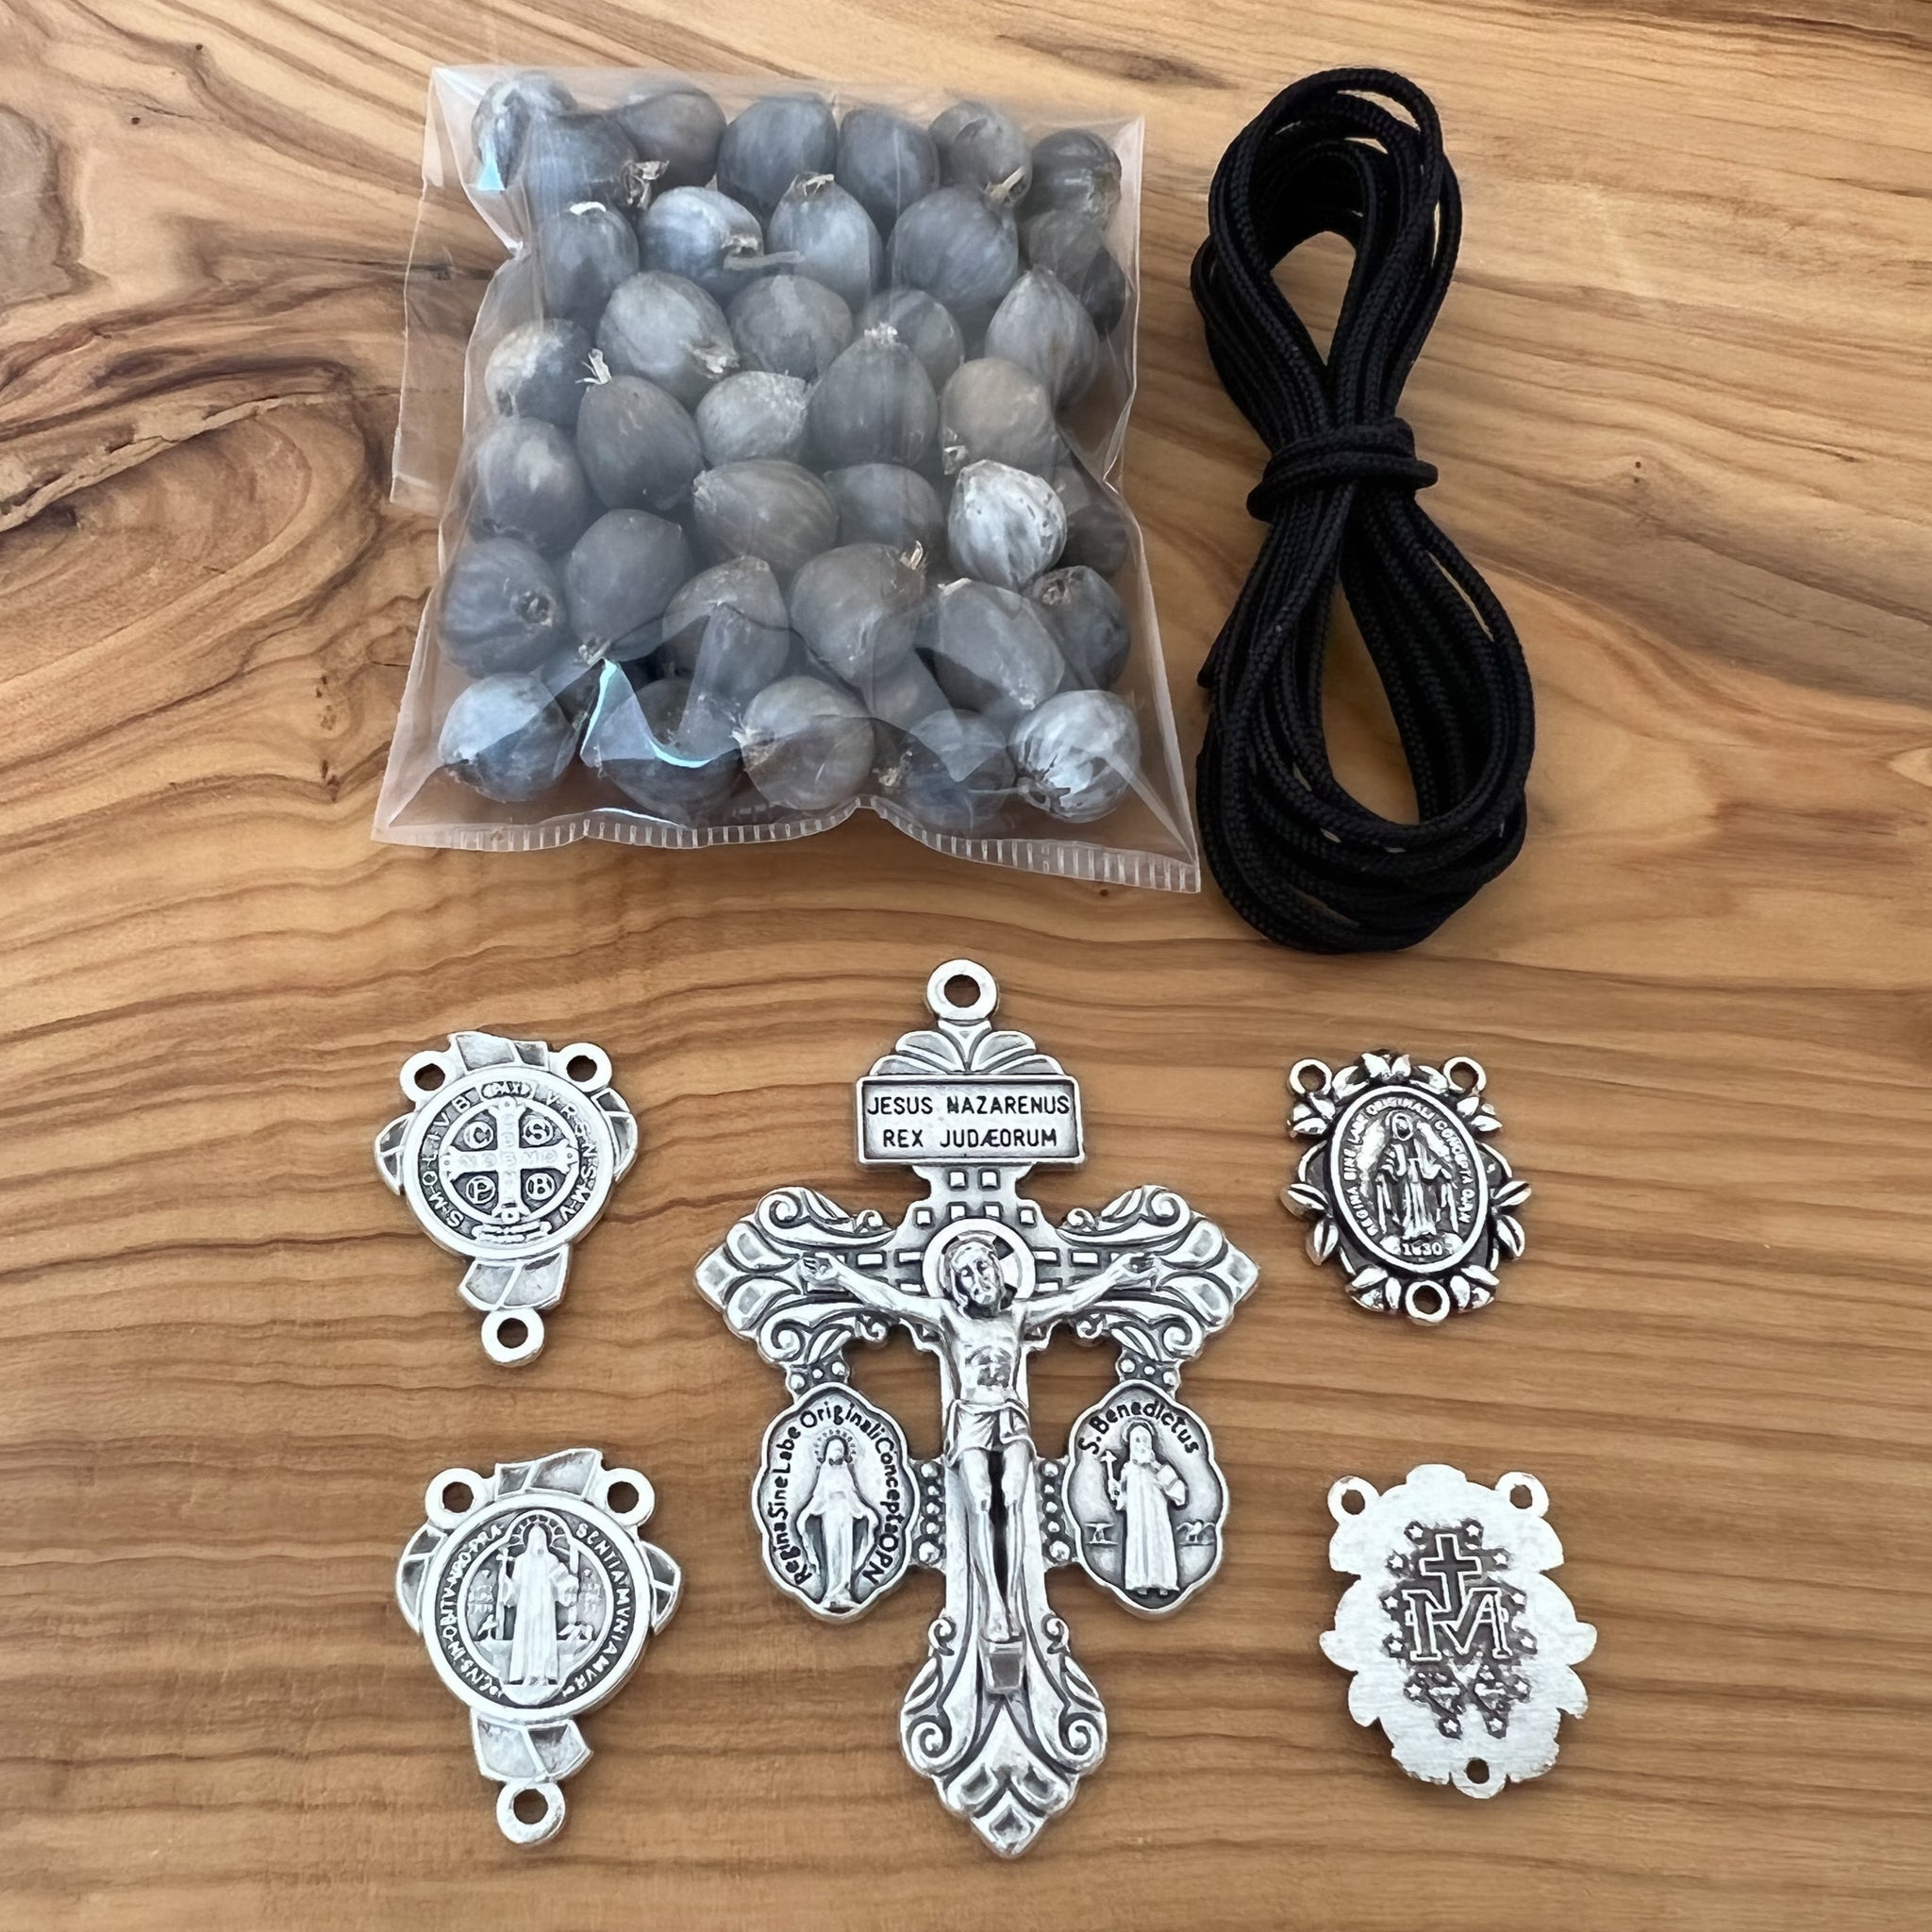 DIY Rosary Kit With Pardon Crucifix Cross Beads And Medal